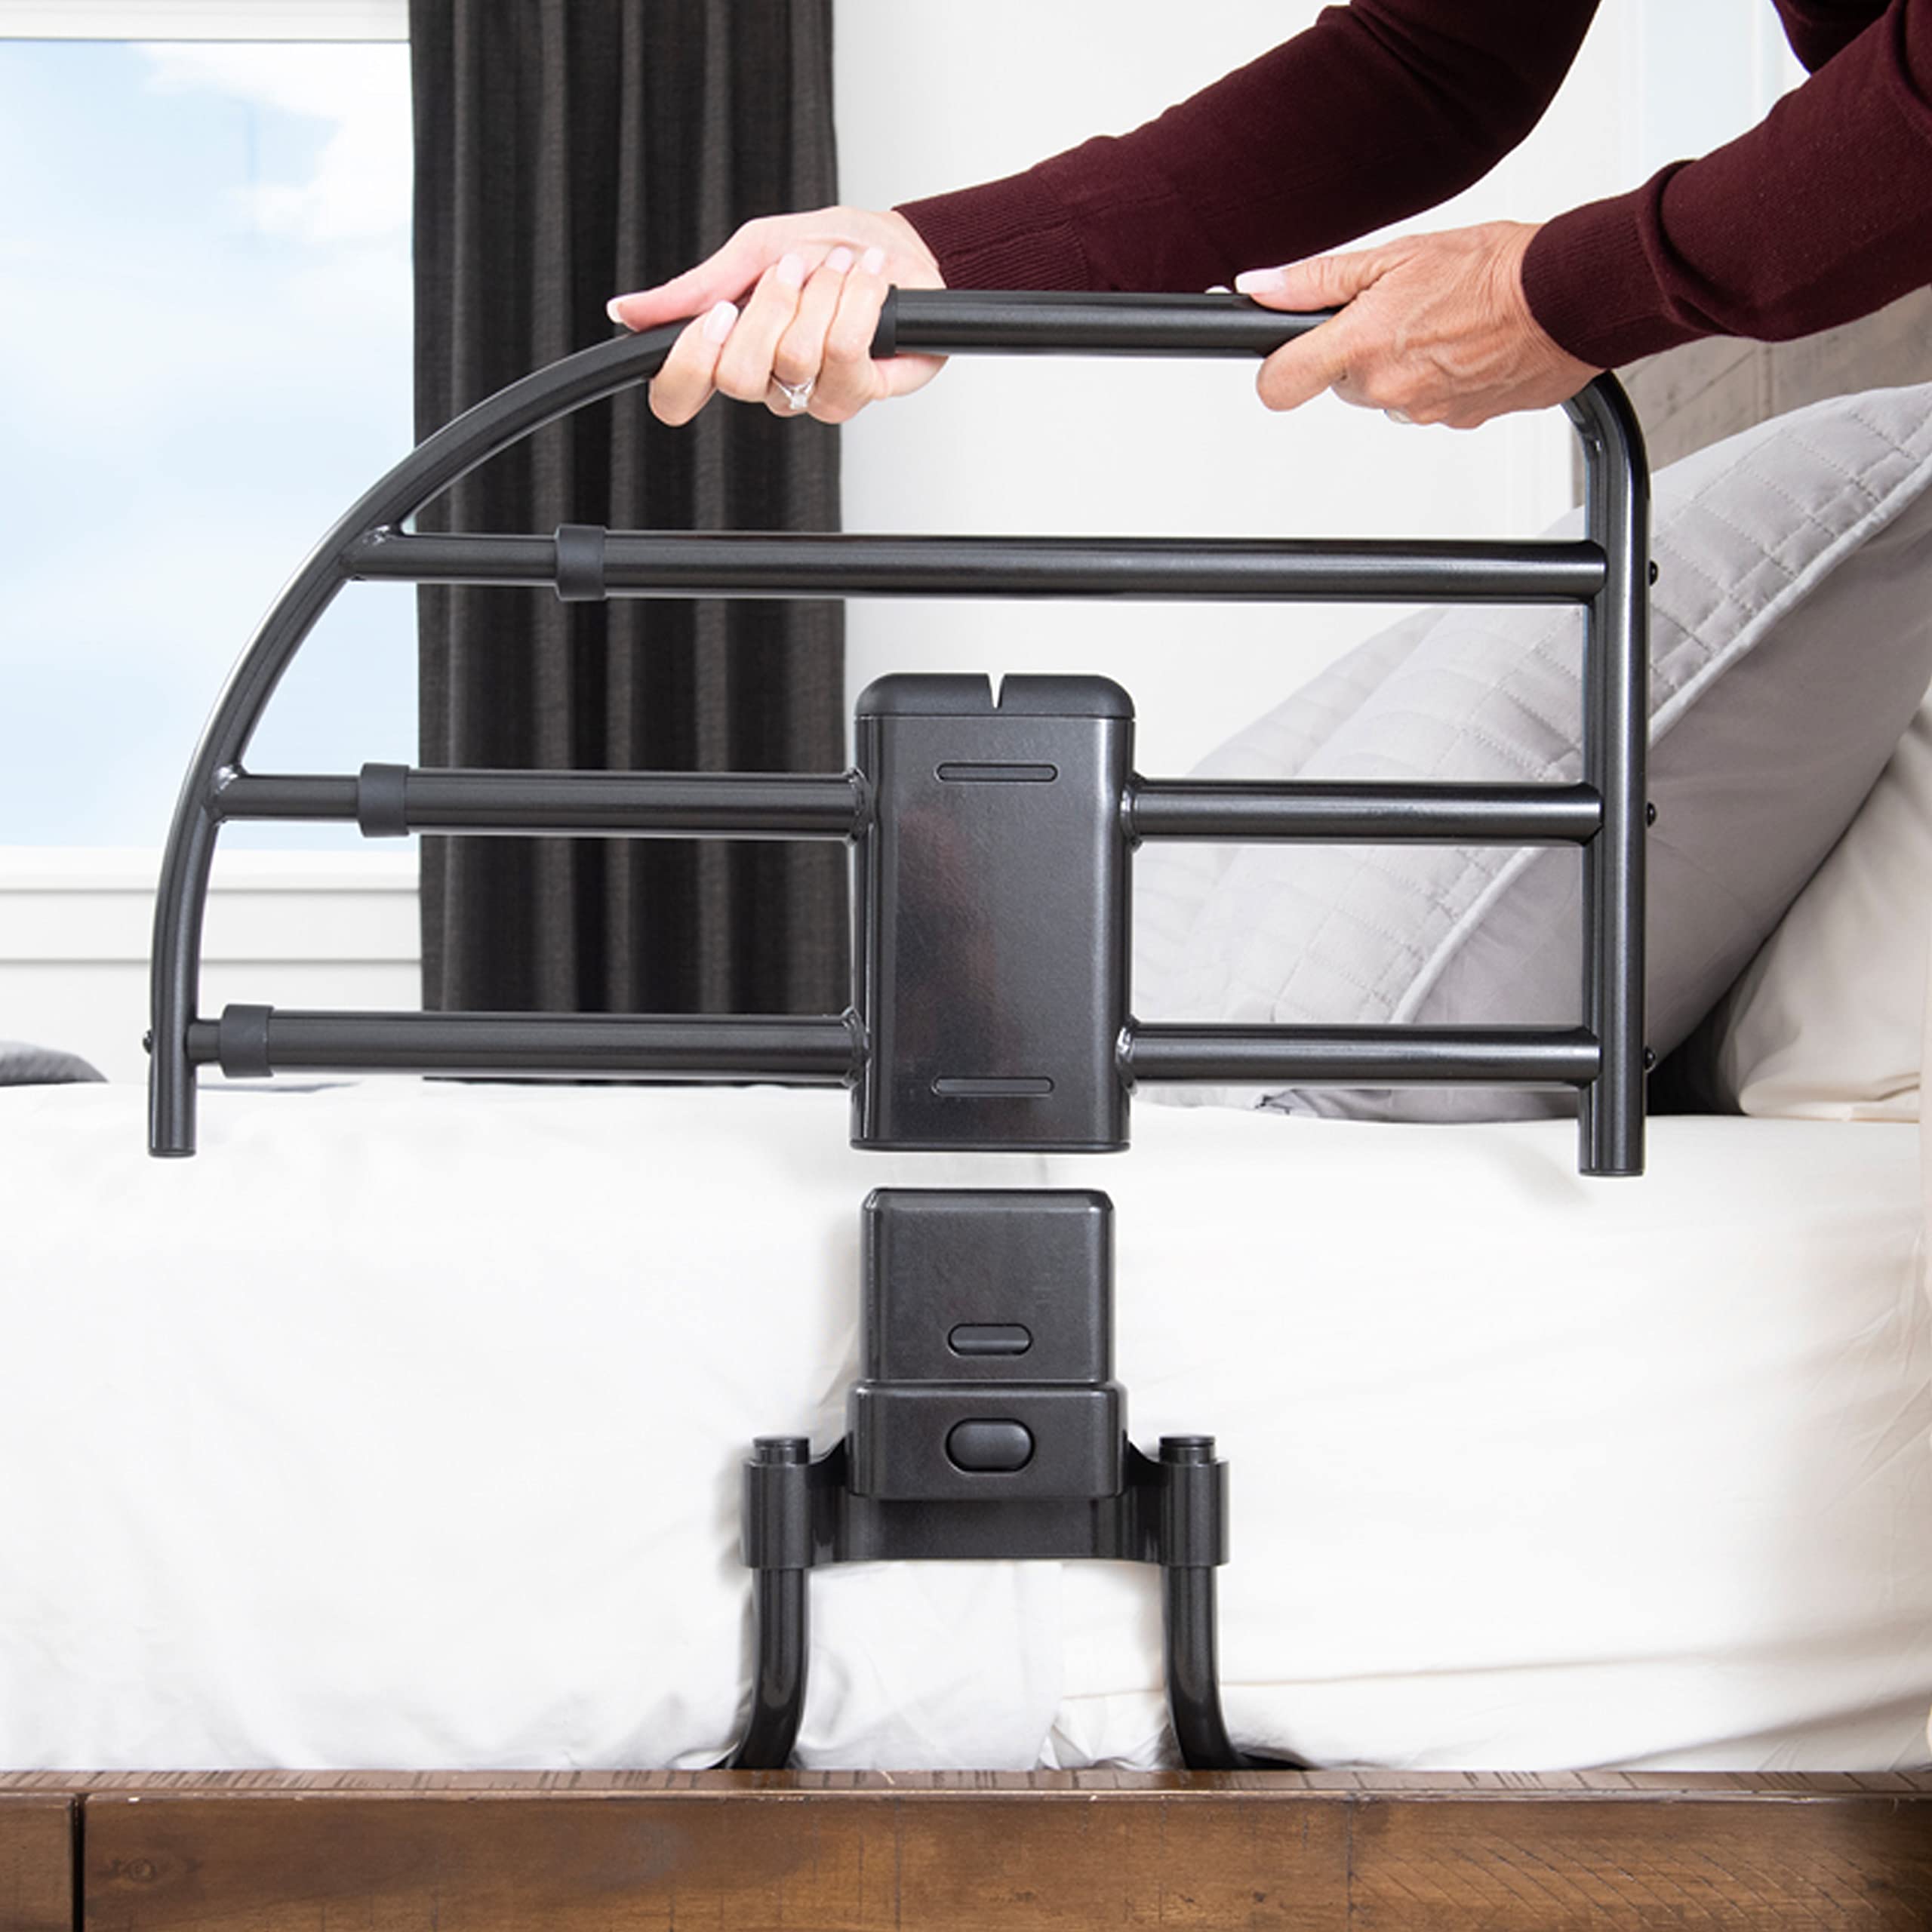 Able Life Click-N-Go Extendable Bed Rail, Removable Bed Handle for Elderly, Safe and Easy to Use Adjustable Assist Rail for Seniors, Prevents Falls, Fits Most King, Queen, Full, and Twin Beds